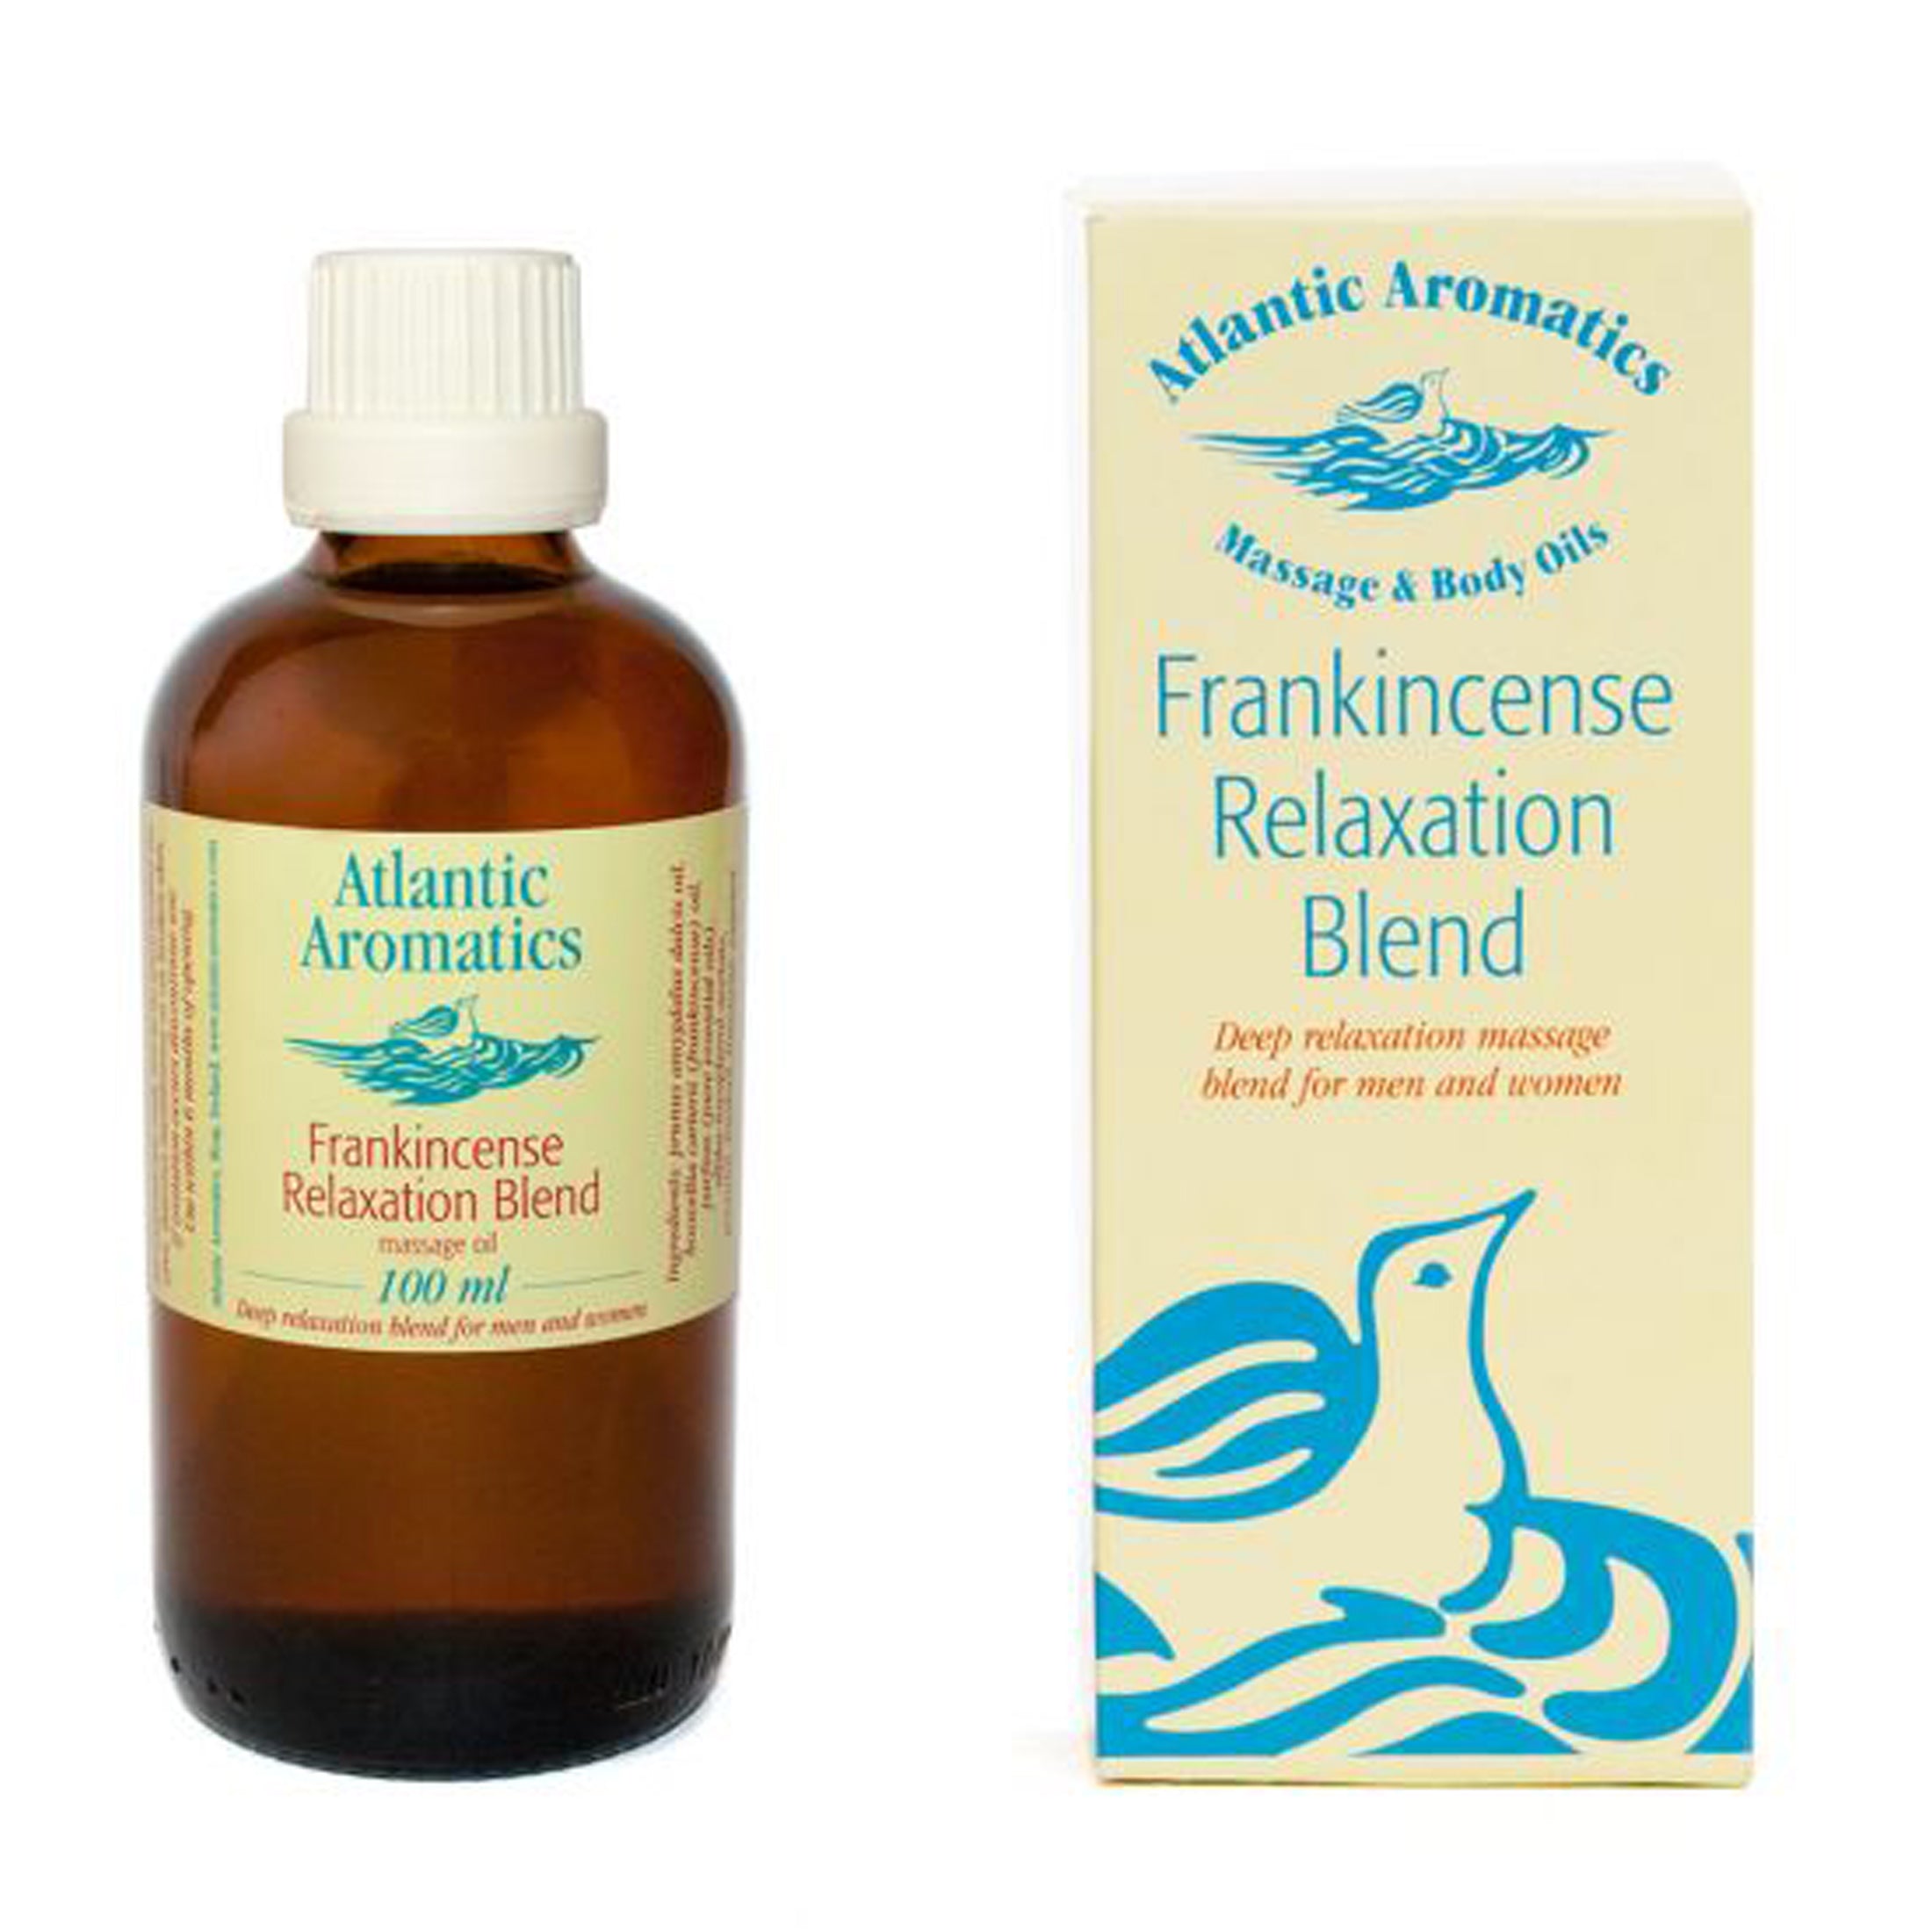 Frankincense Relaxation Blend